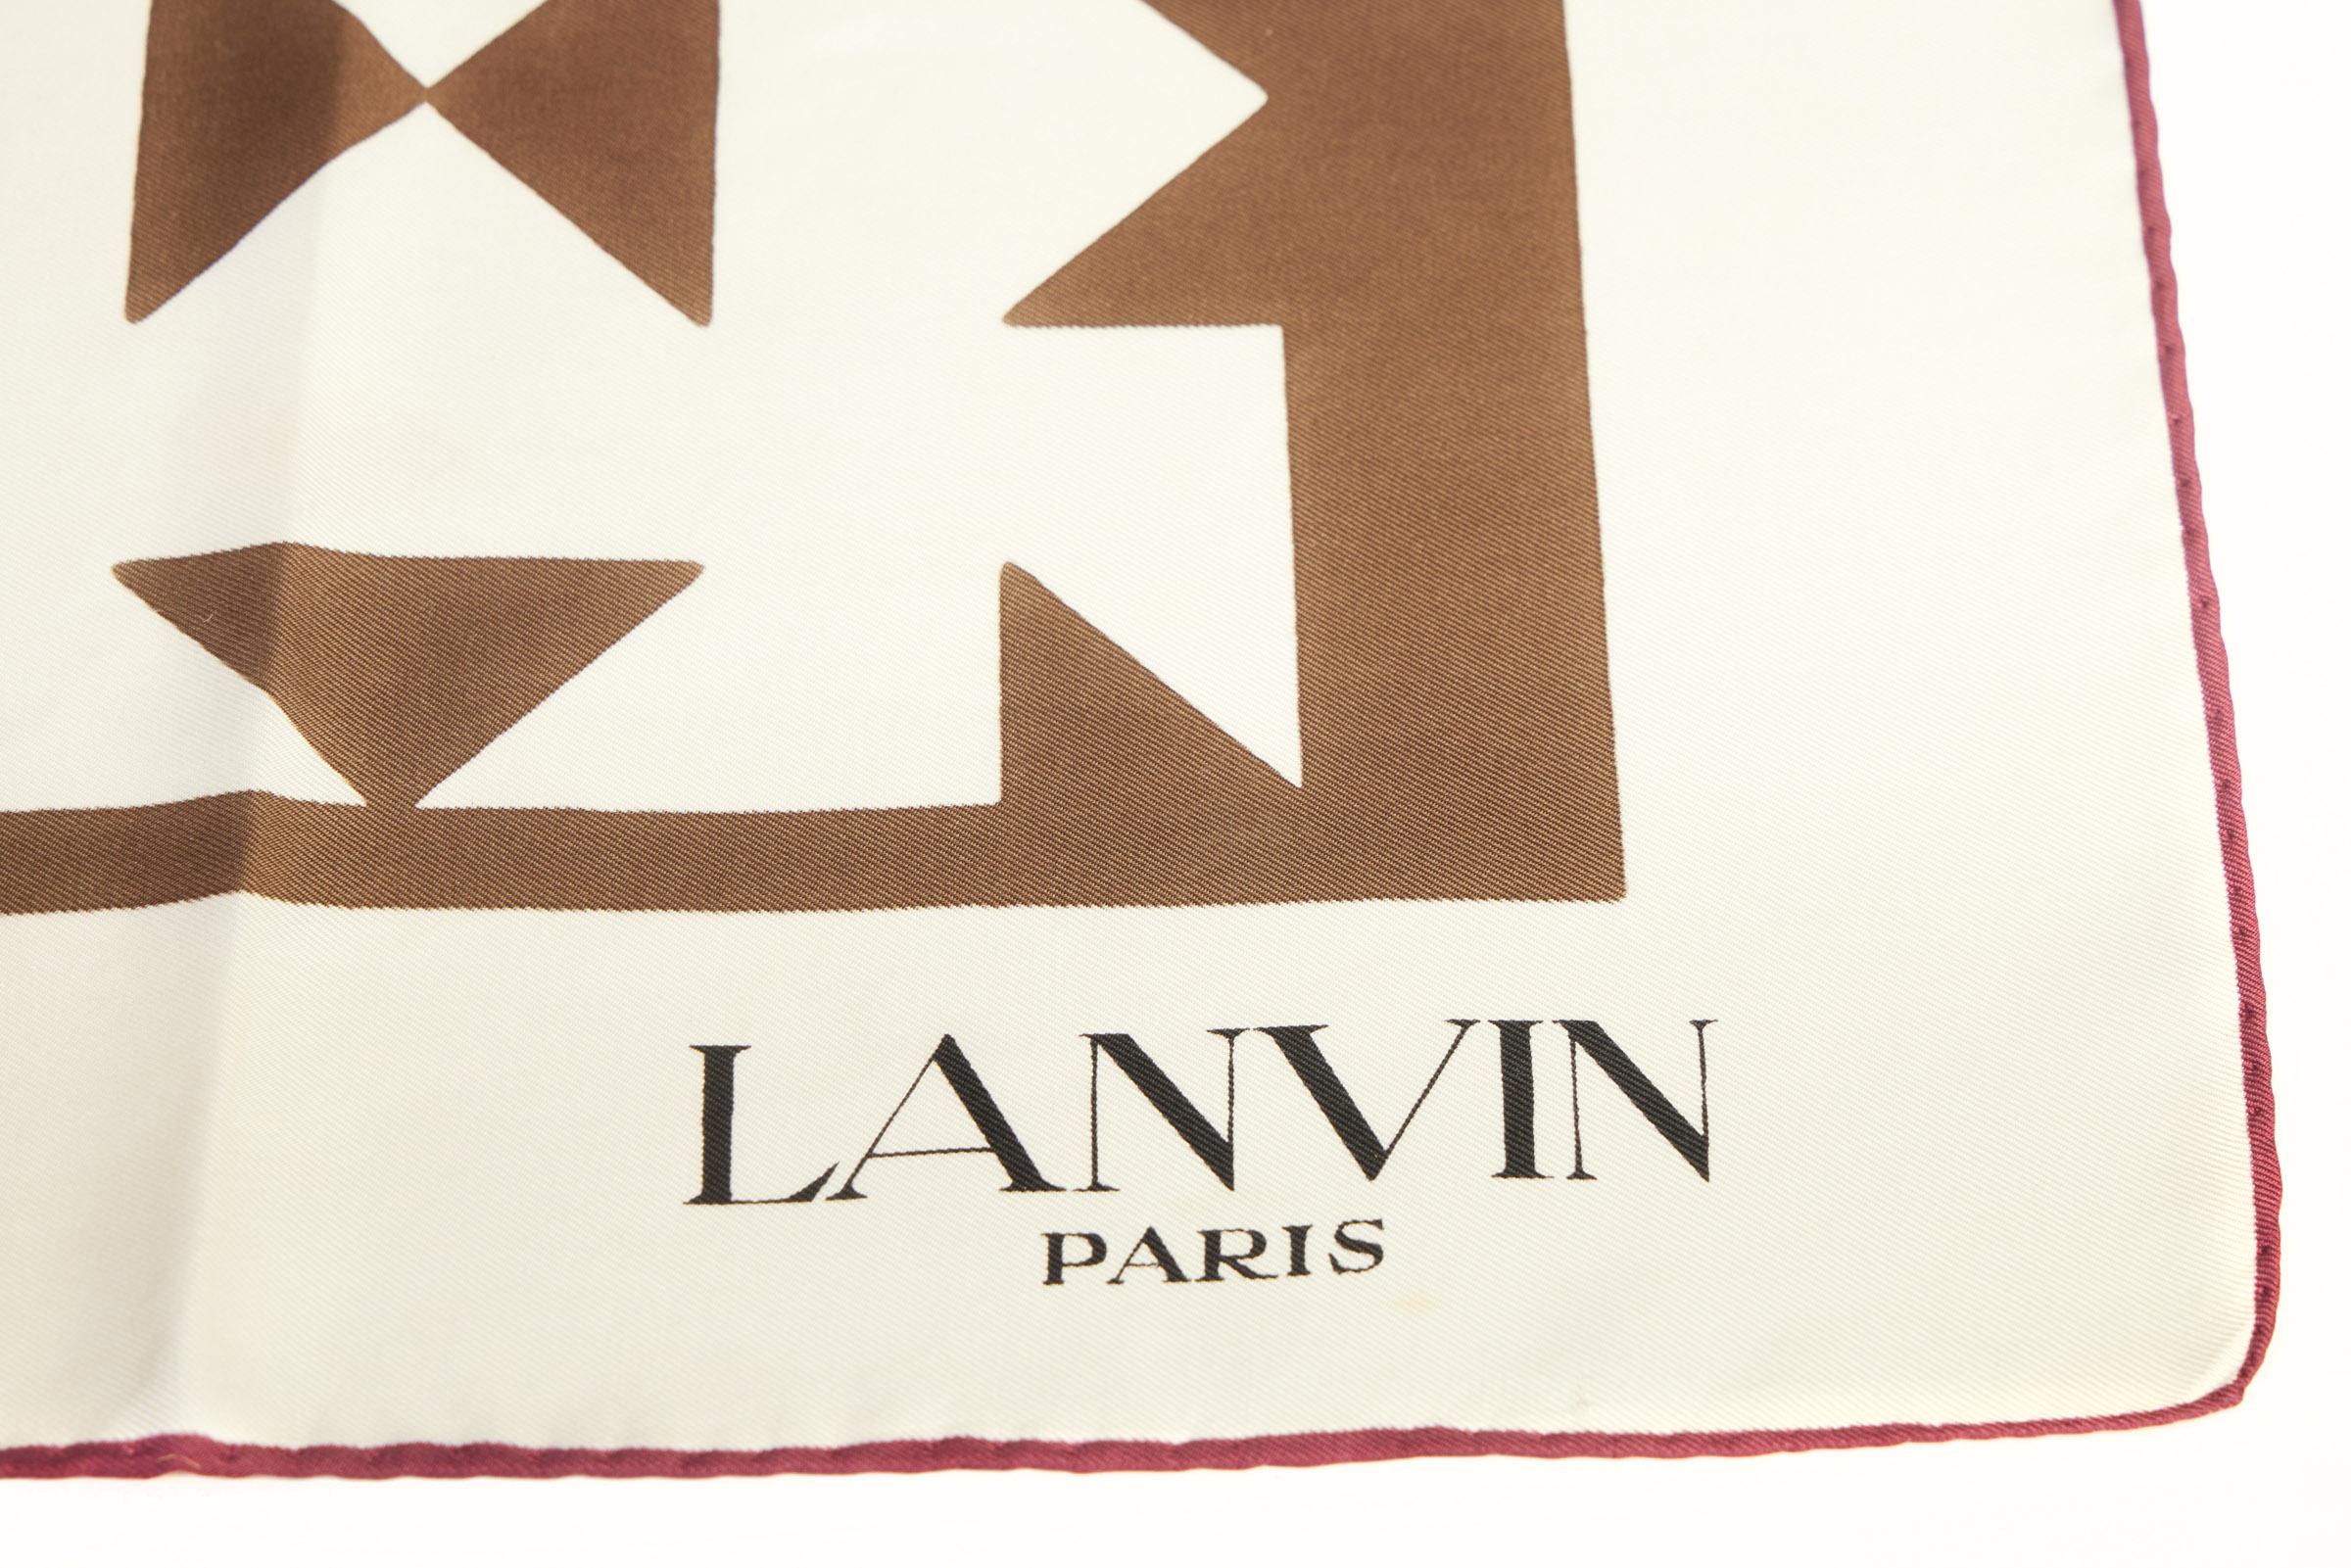 Lanvin vintage silk scarf with geometric design. Hand rolled edges.